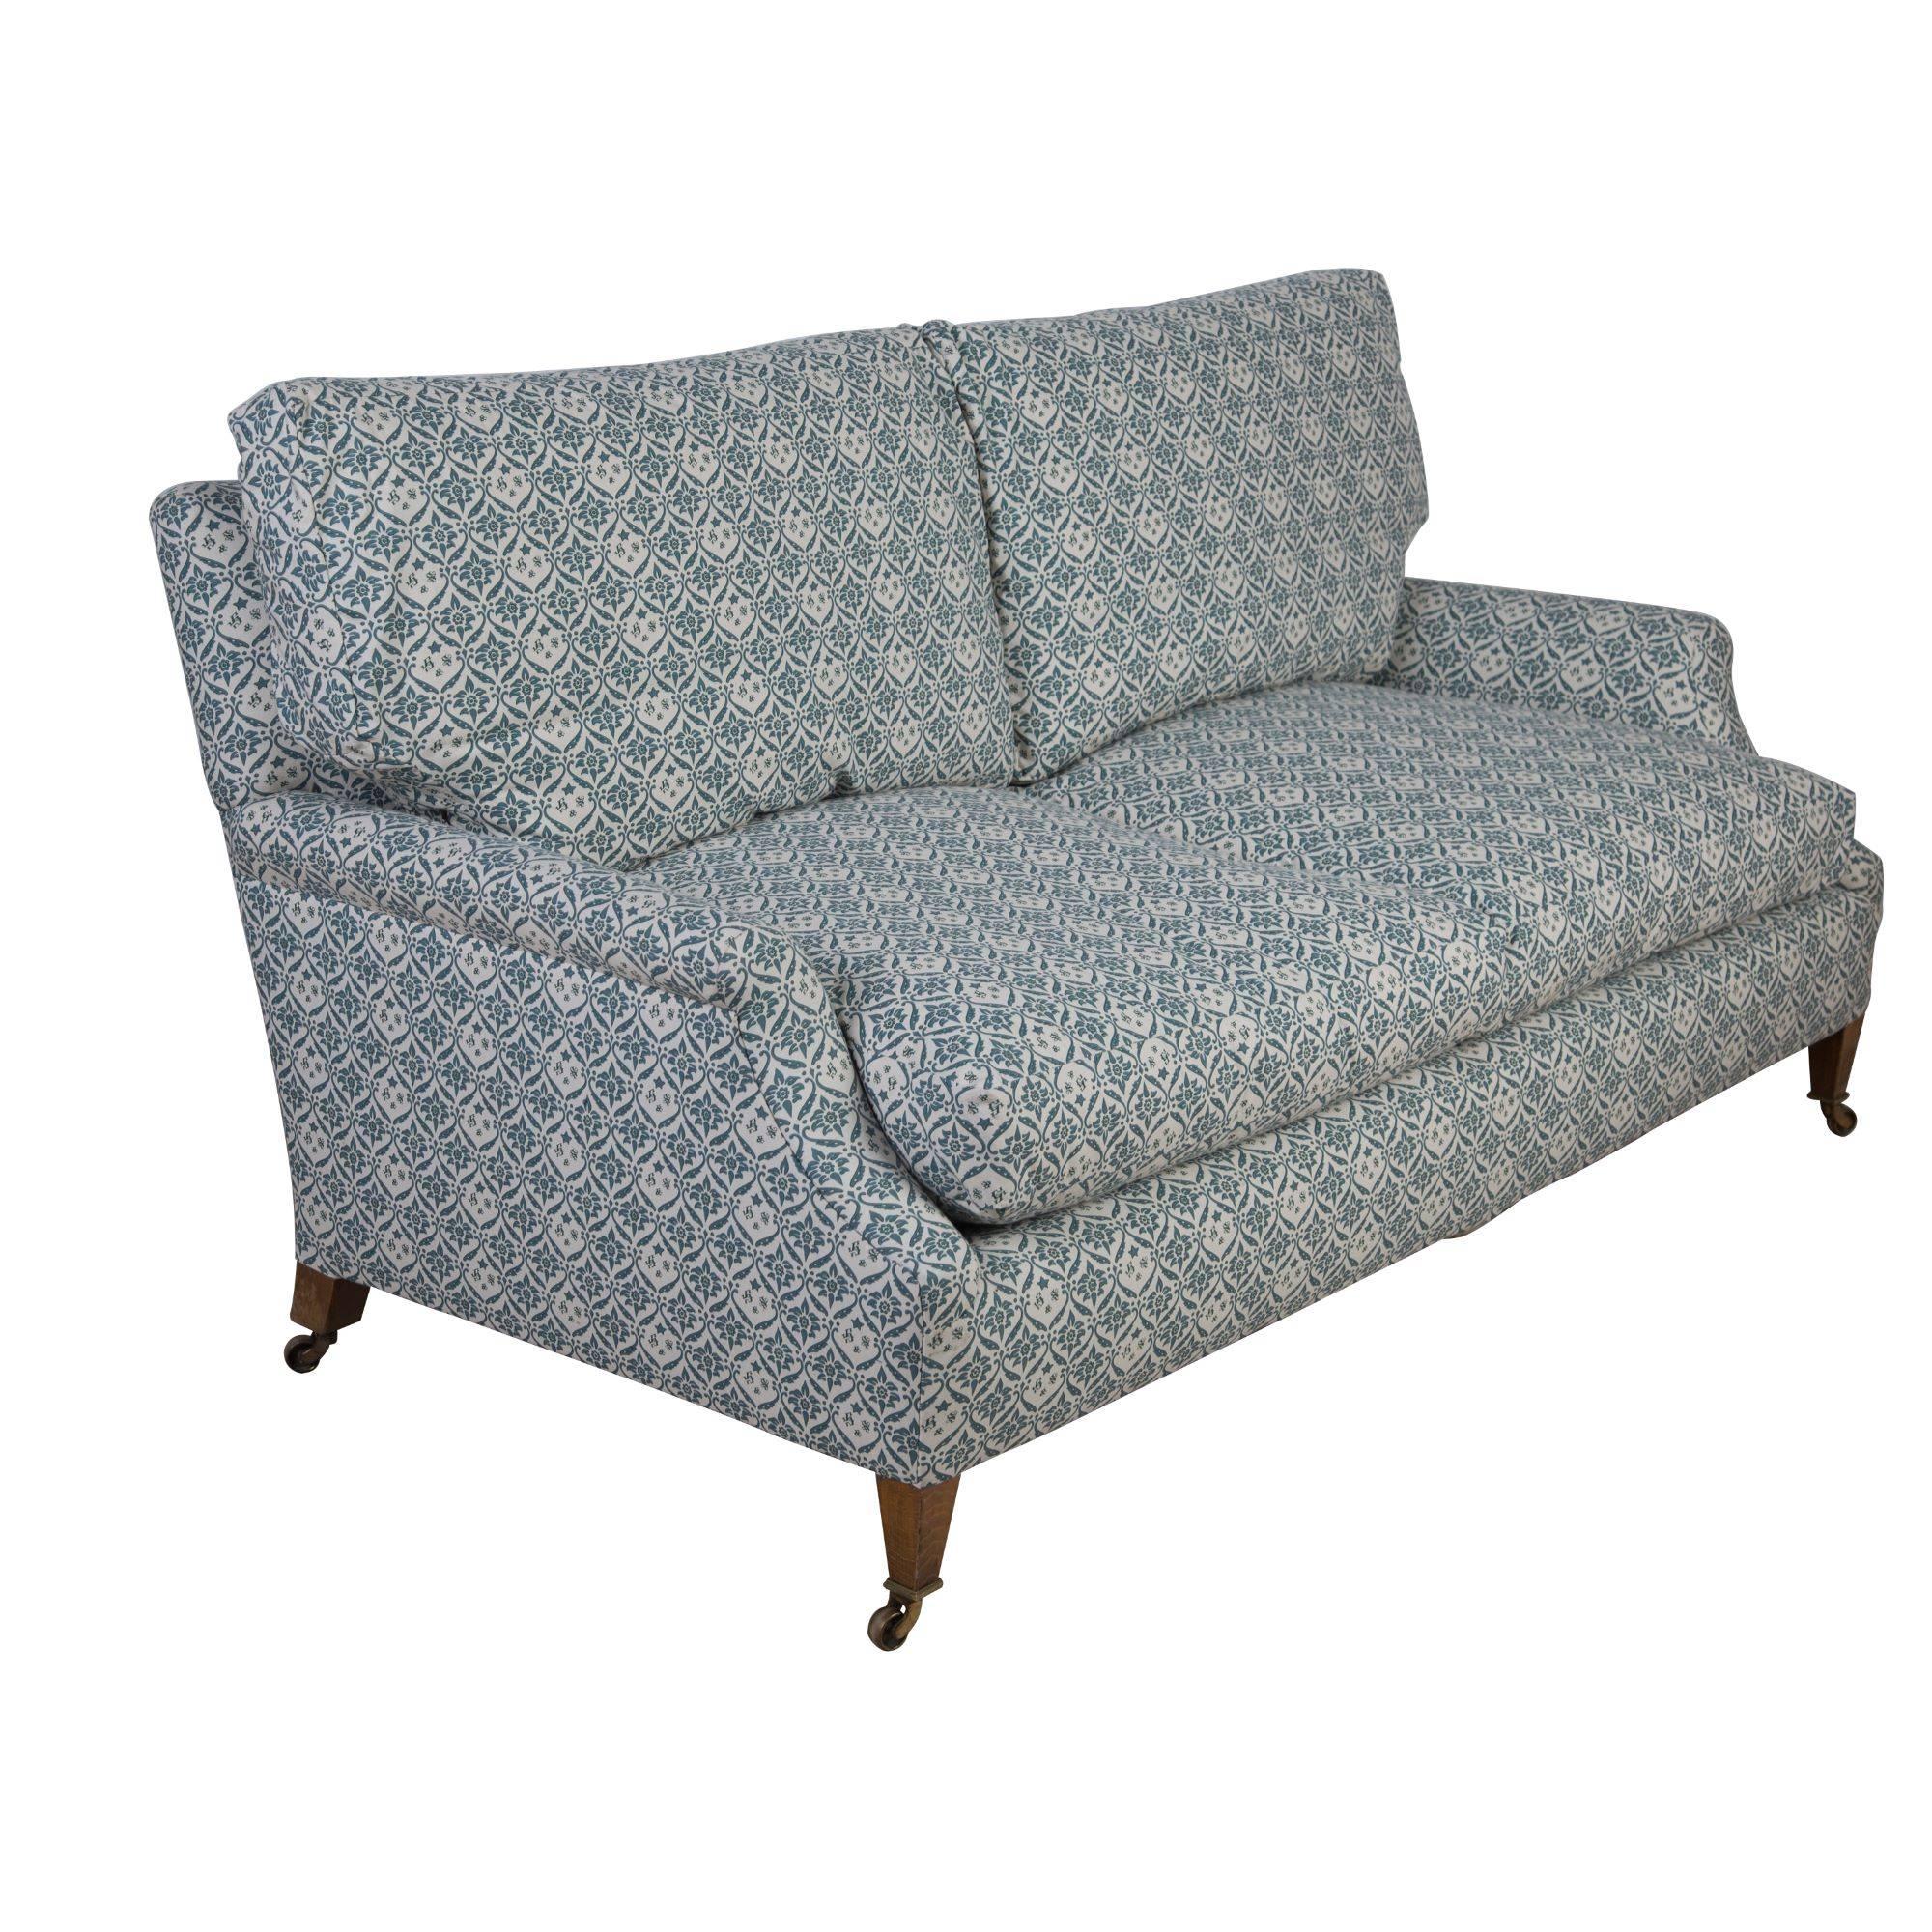 A 1940s two-seat sofa made by Lenygon and Morant for Howard and Sons. Re-upholstered in a copy of the Classic H&S ticking.